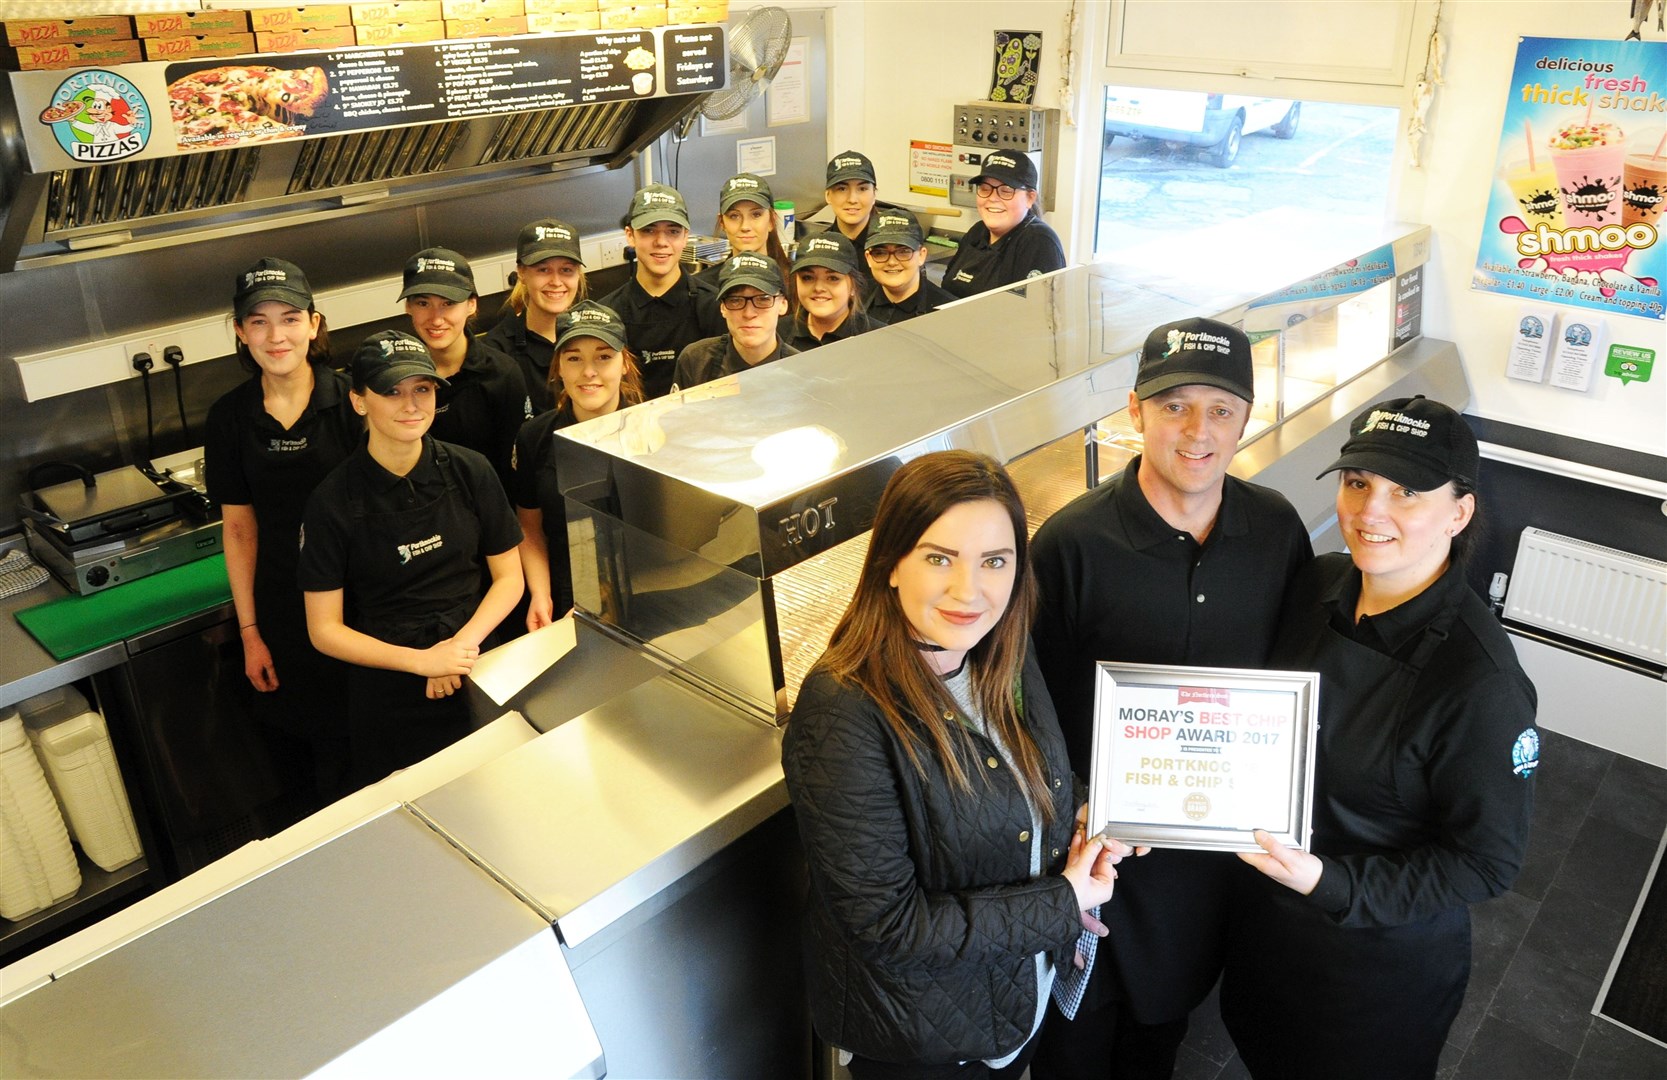 Portknockie Fish and Chip Shop owners Moira Proctor and Ian Nuttall receive their Moray Best Fish and Chip Shop Award from Northern Scot sales representative Claire Miller. Picture: Eric Cormack.